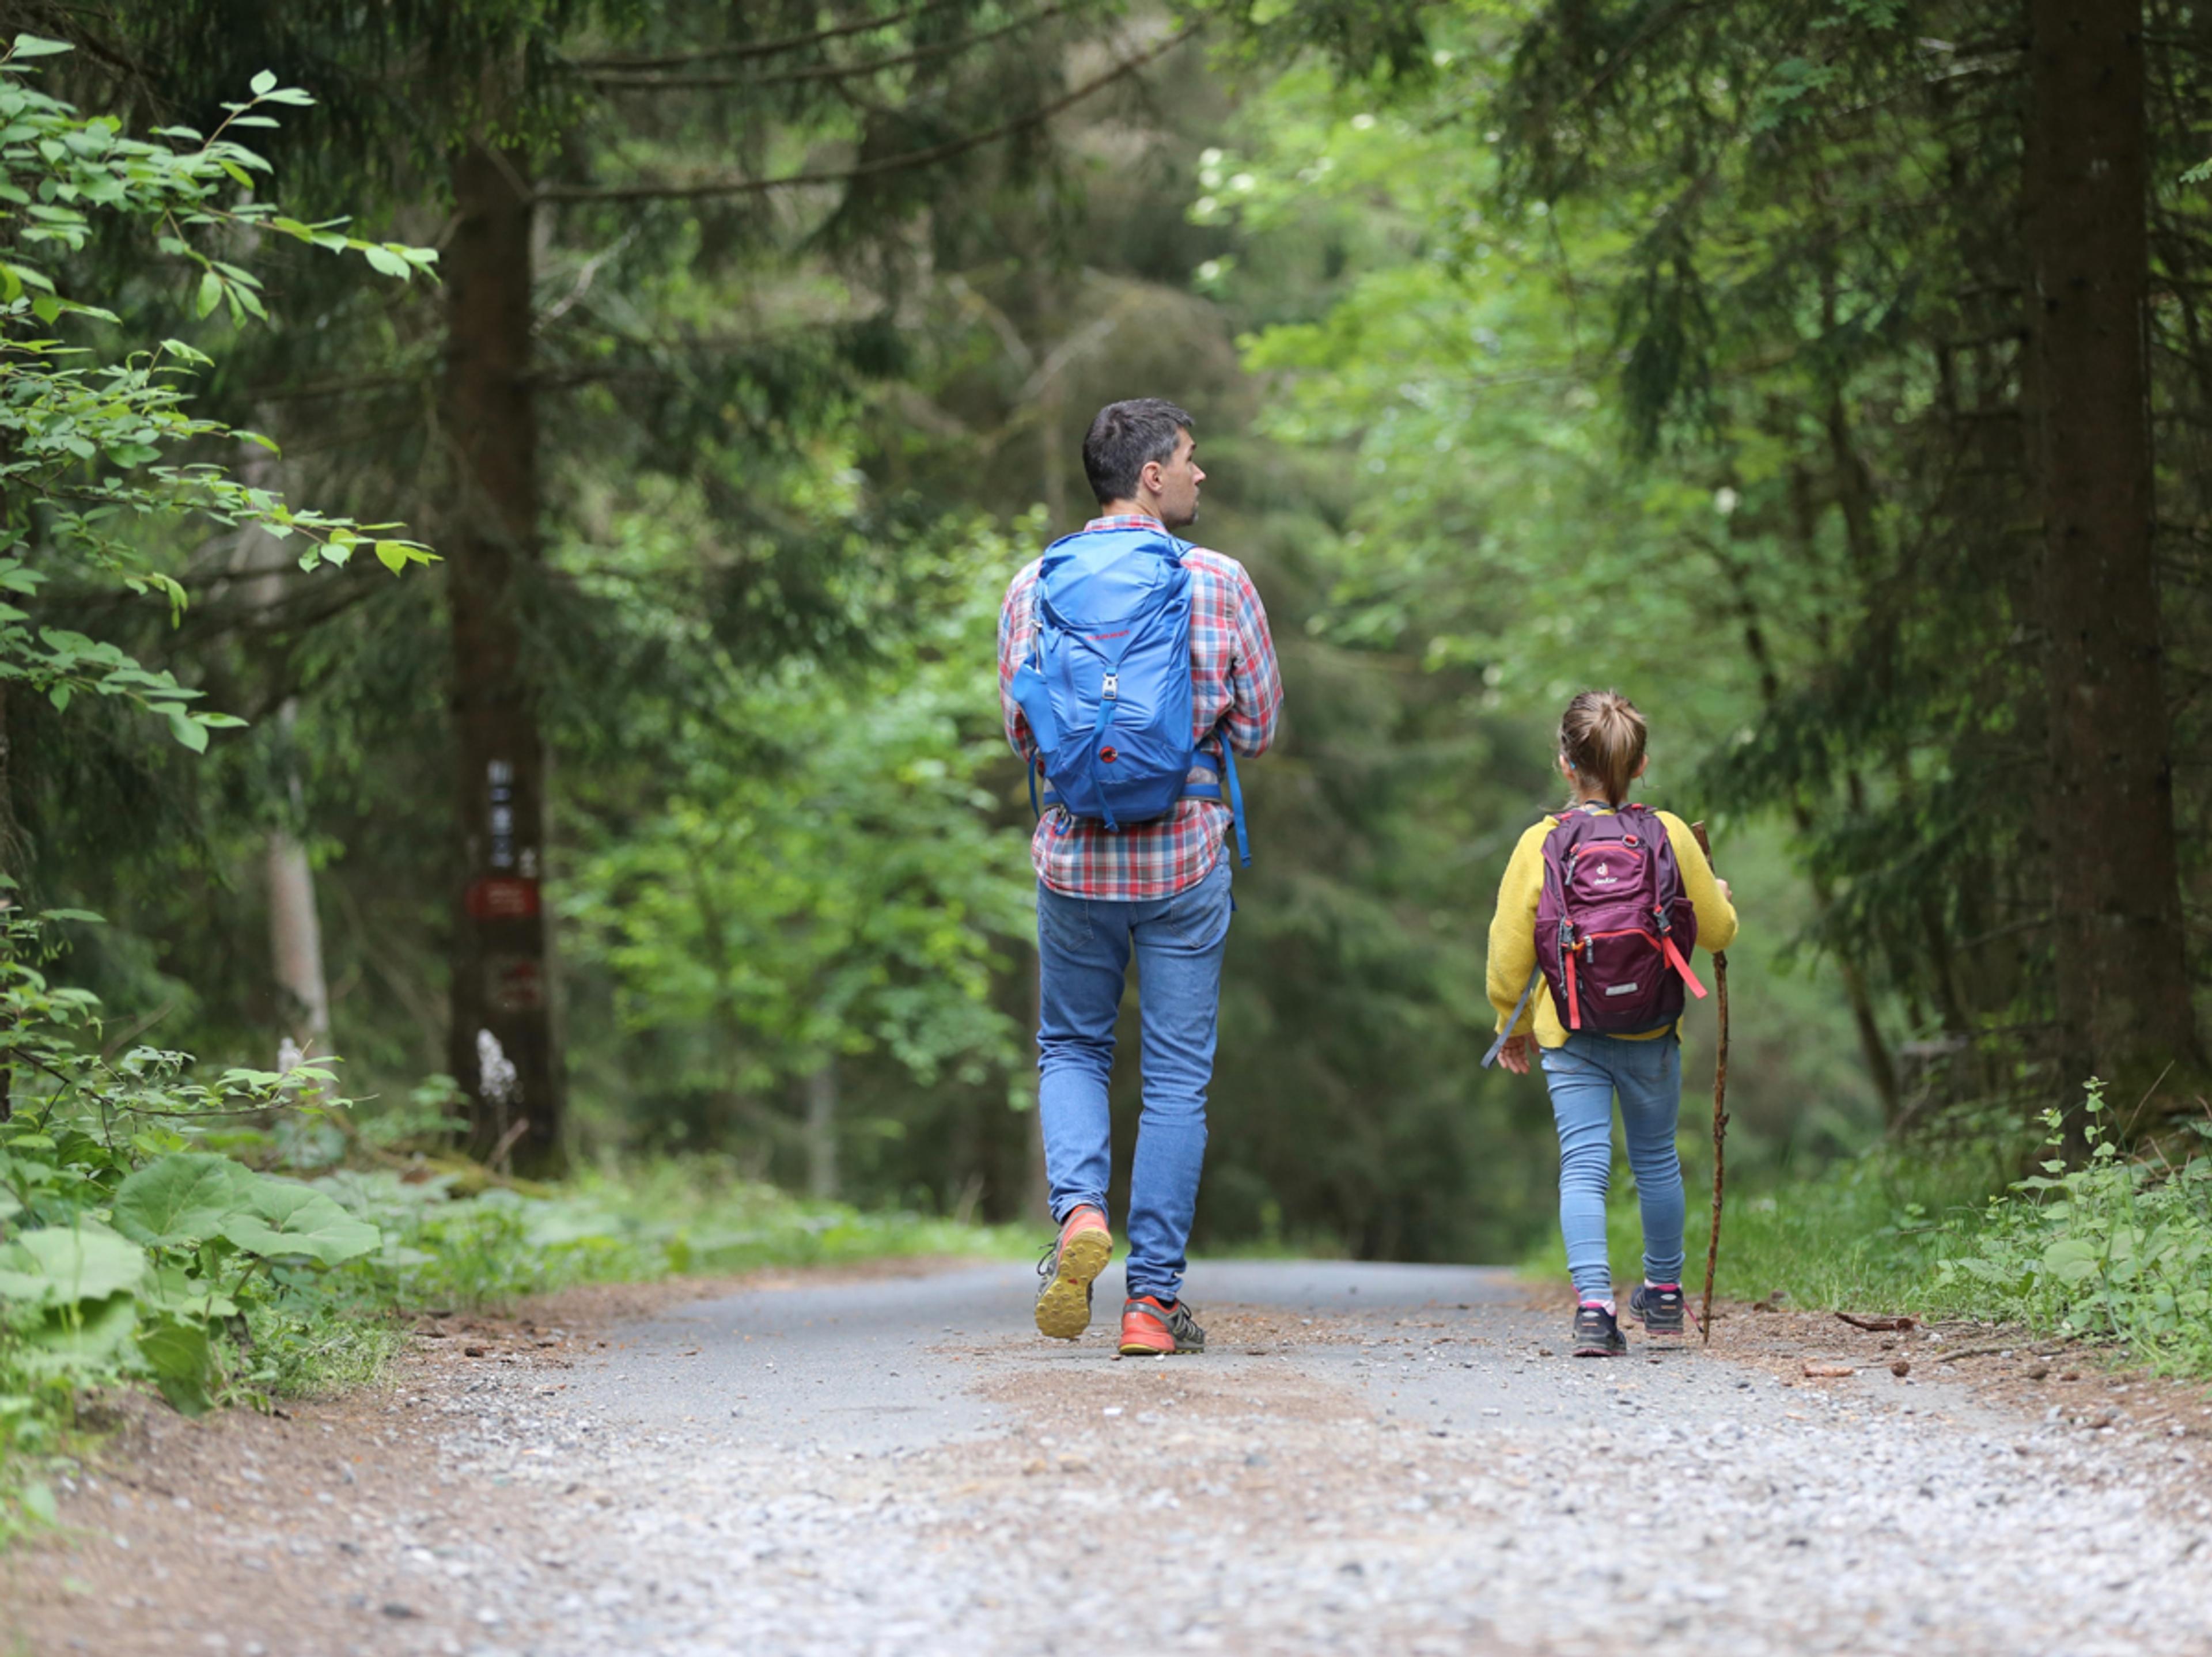 A man and young girl walk together in the woods wearing hiking backpacks